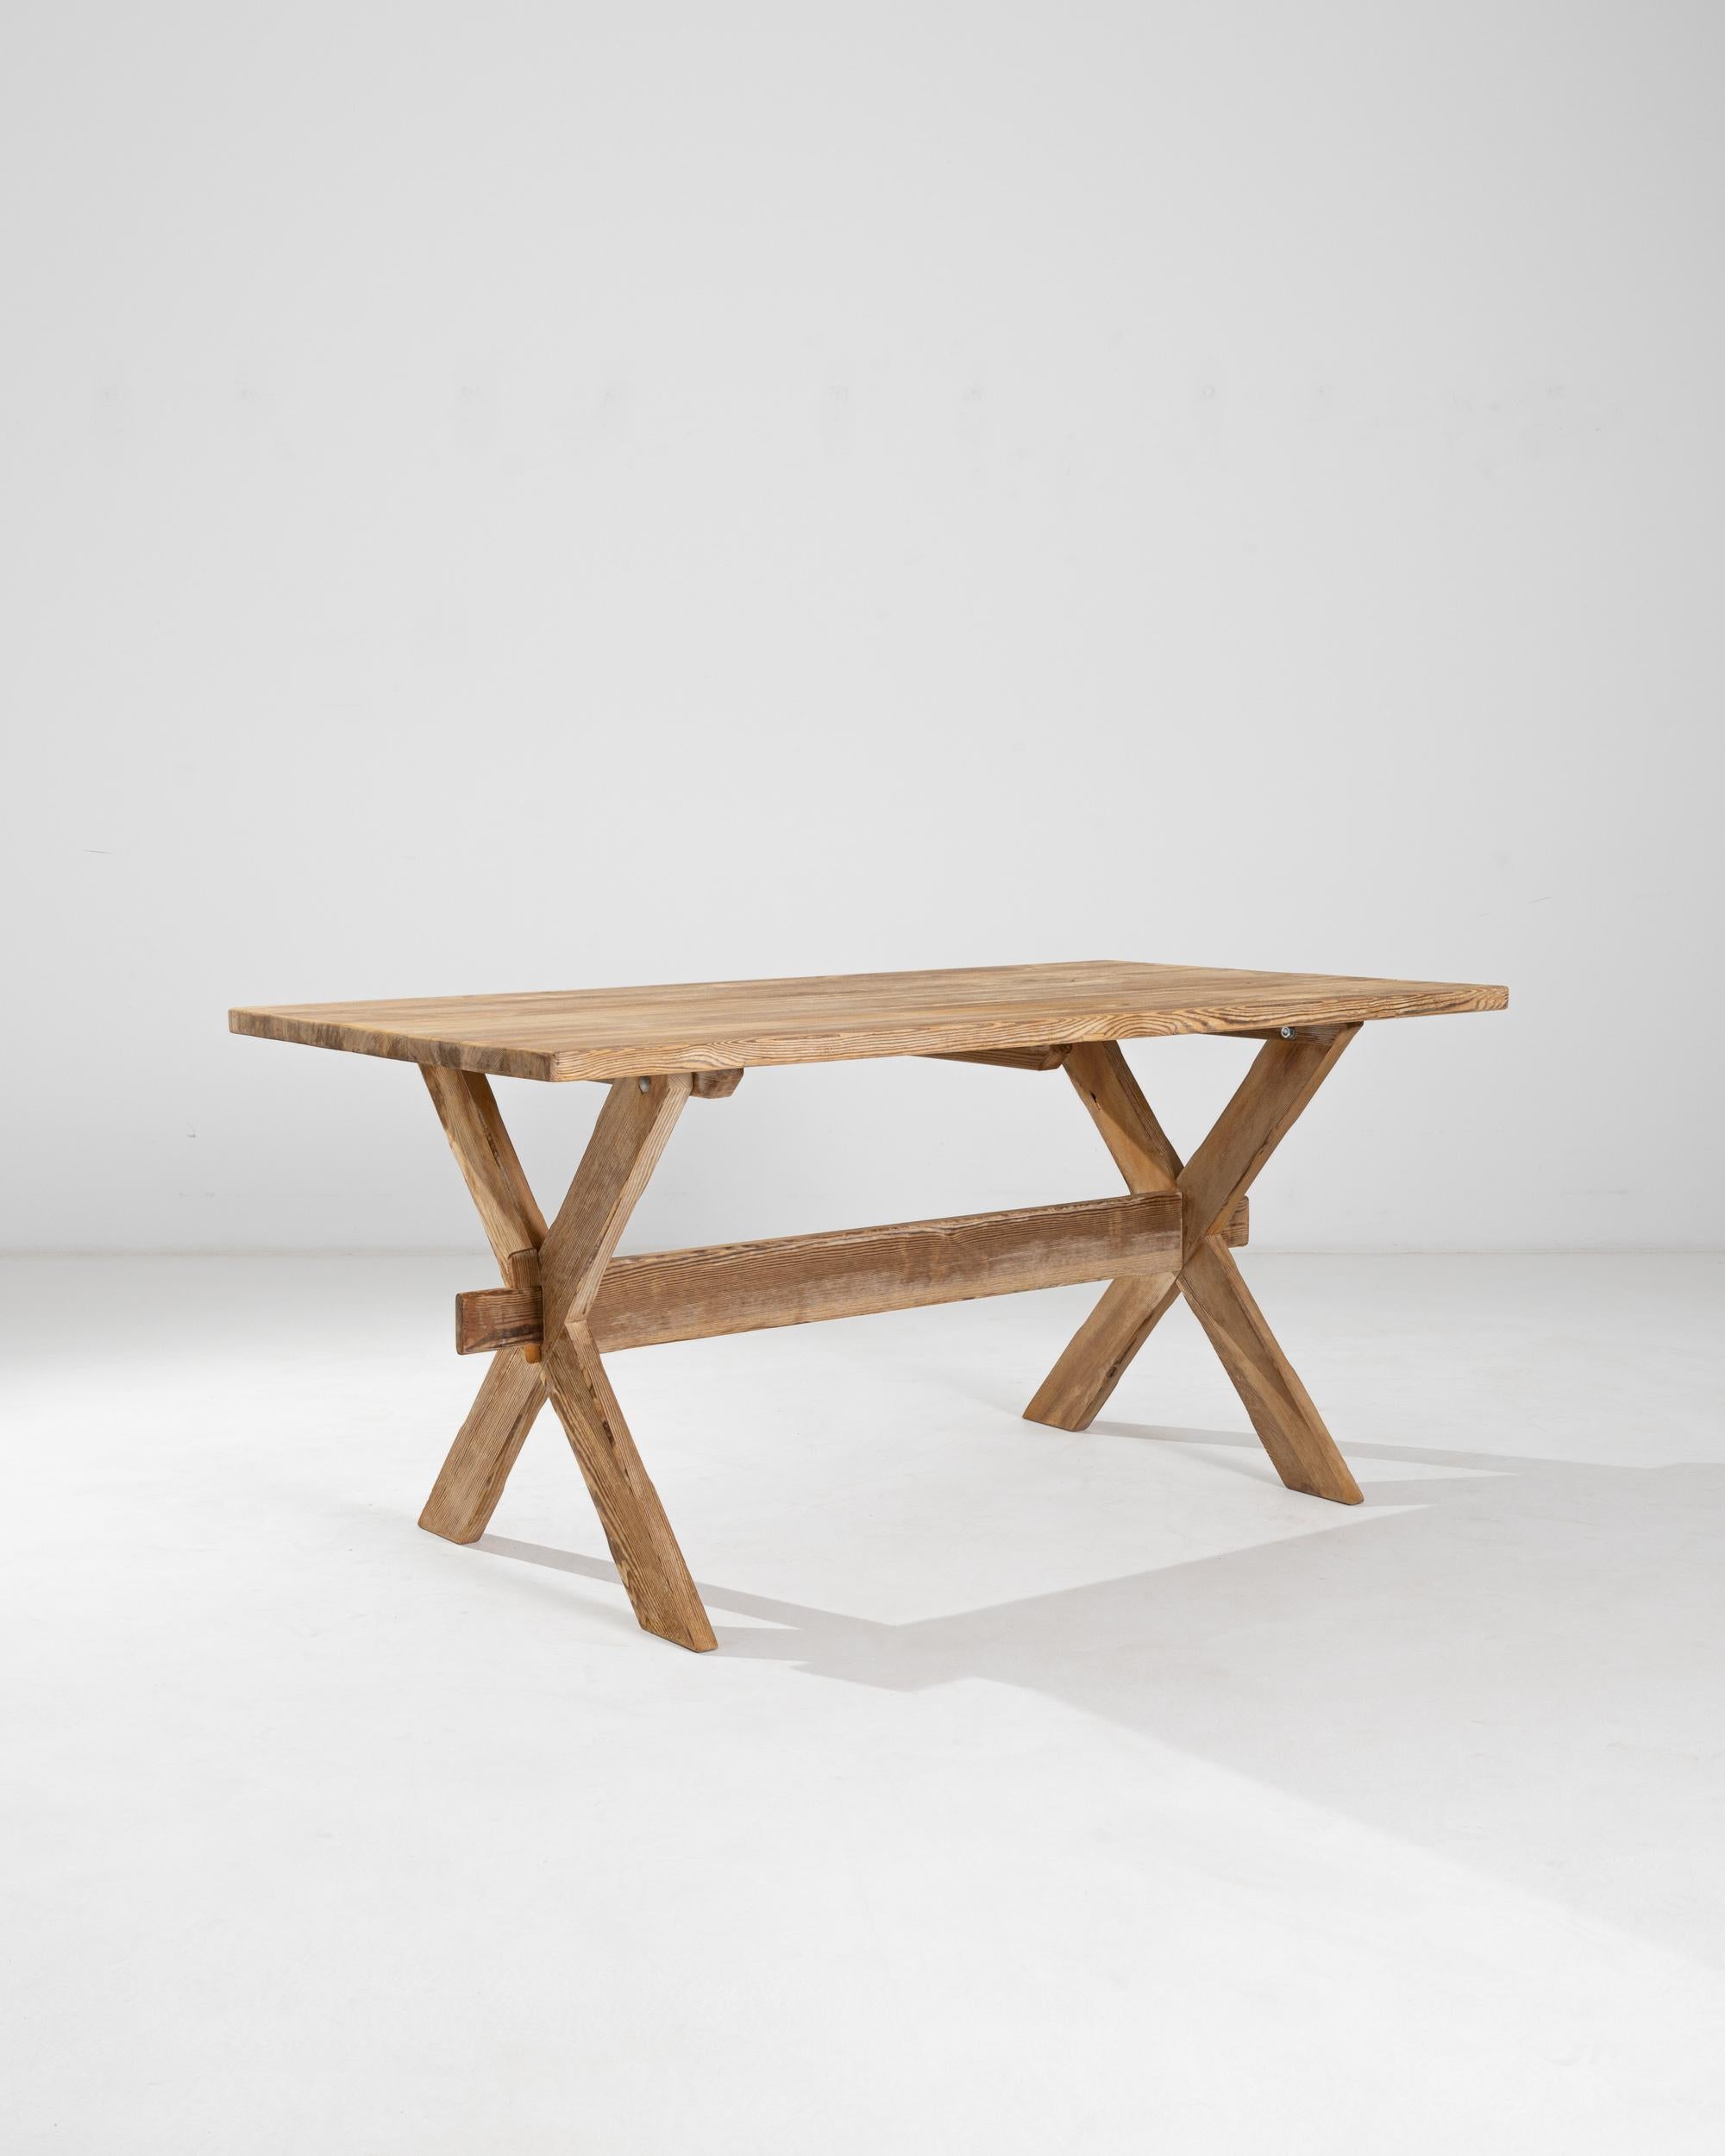 The simplicity and warmth of this vintage wooden table brings to mind the iconic designs of Scandinavian Modernism. Made in Central Europe in the 20th century, the silhouette is similar to that of an outdoor picnic table, evoking the savor of a meal